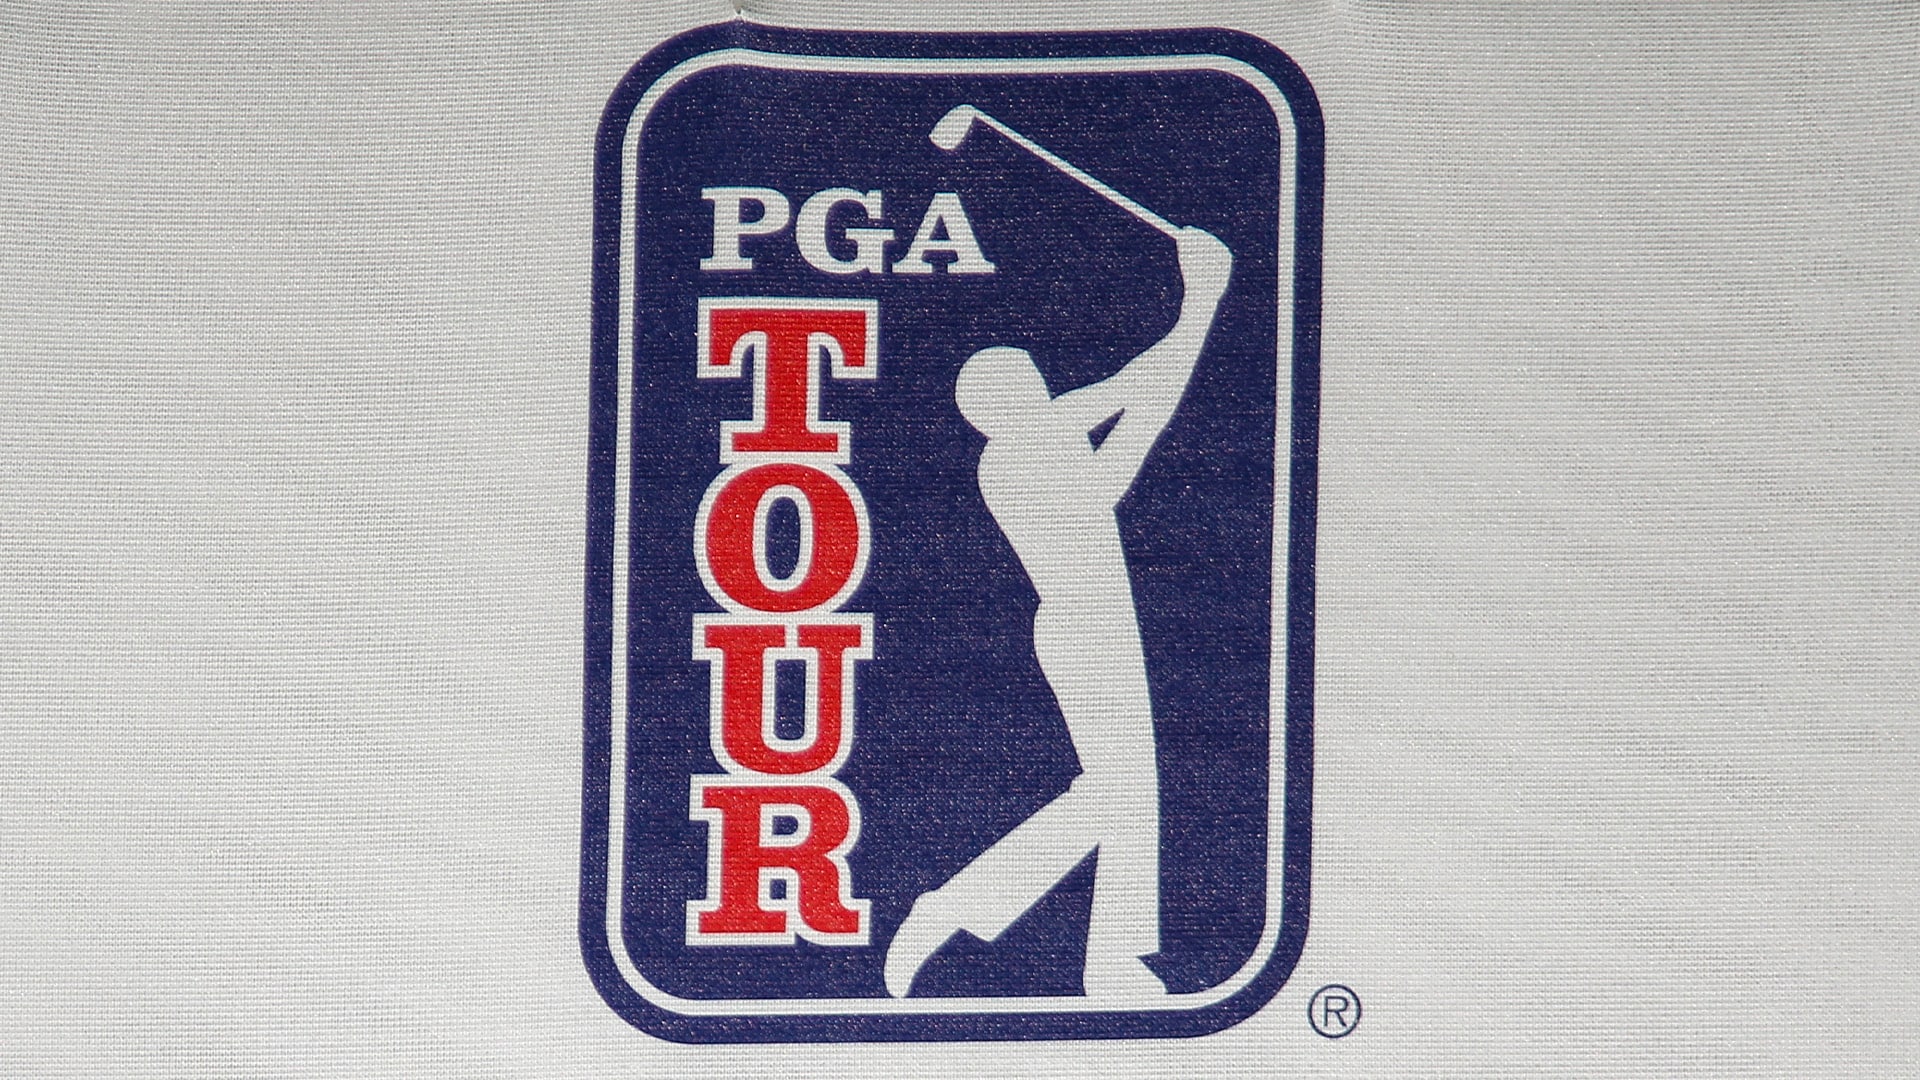 PGA Tour appears bound for new fall schedule concept, but details undetermined